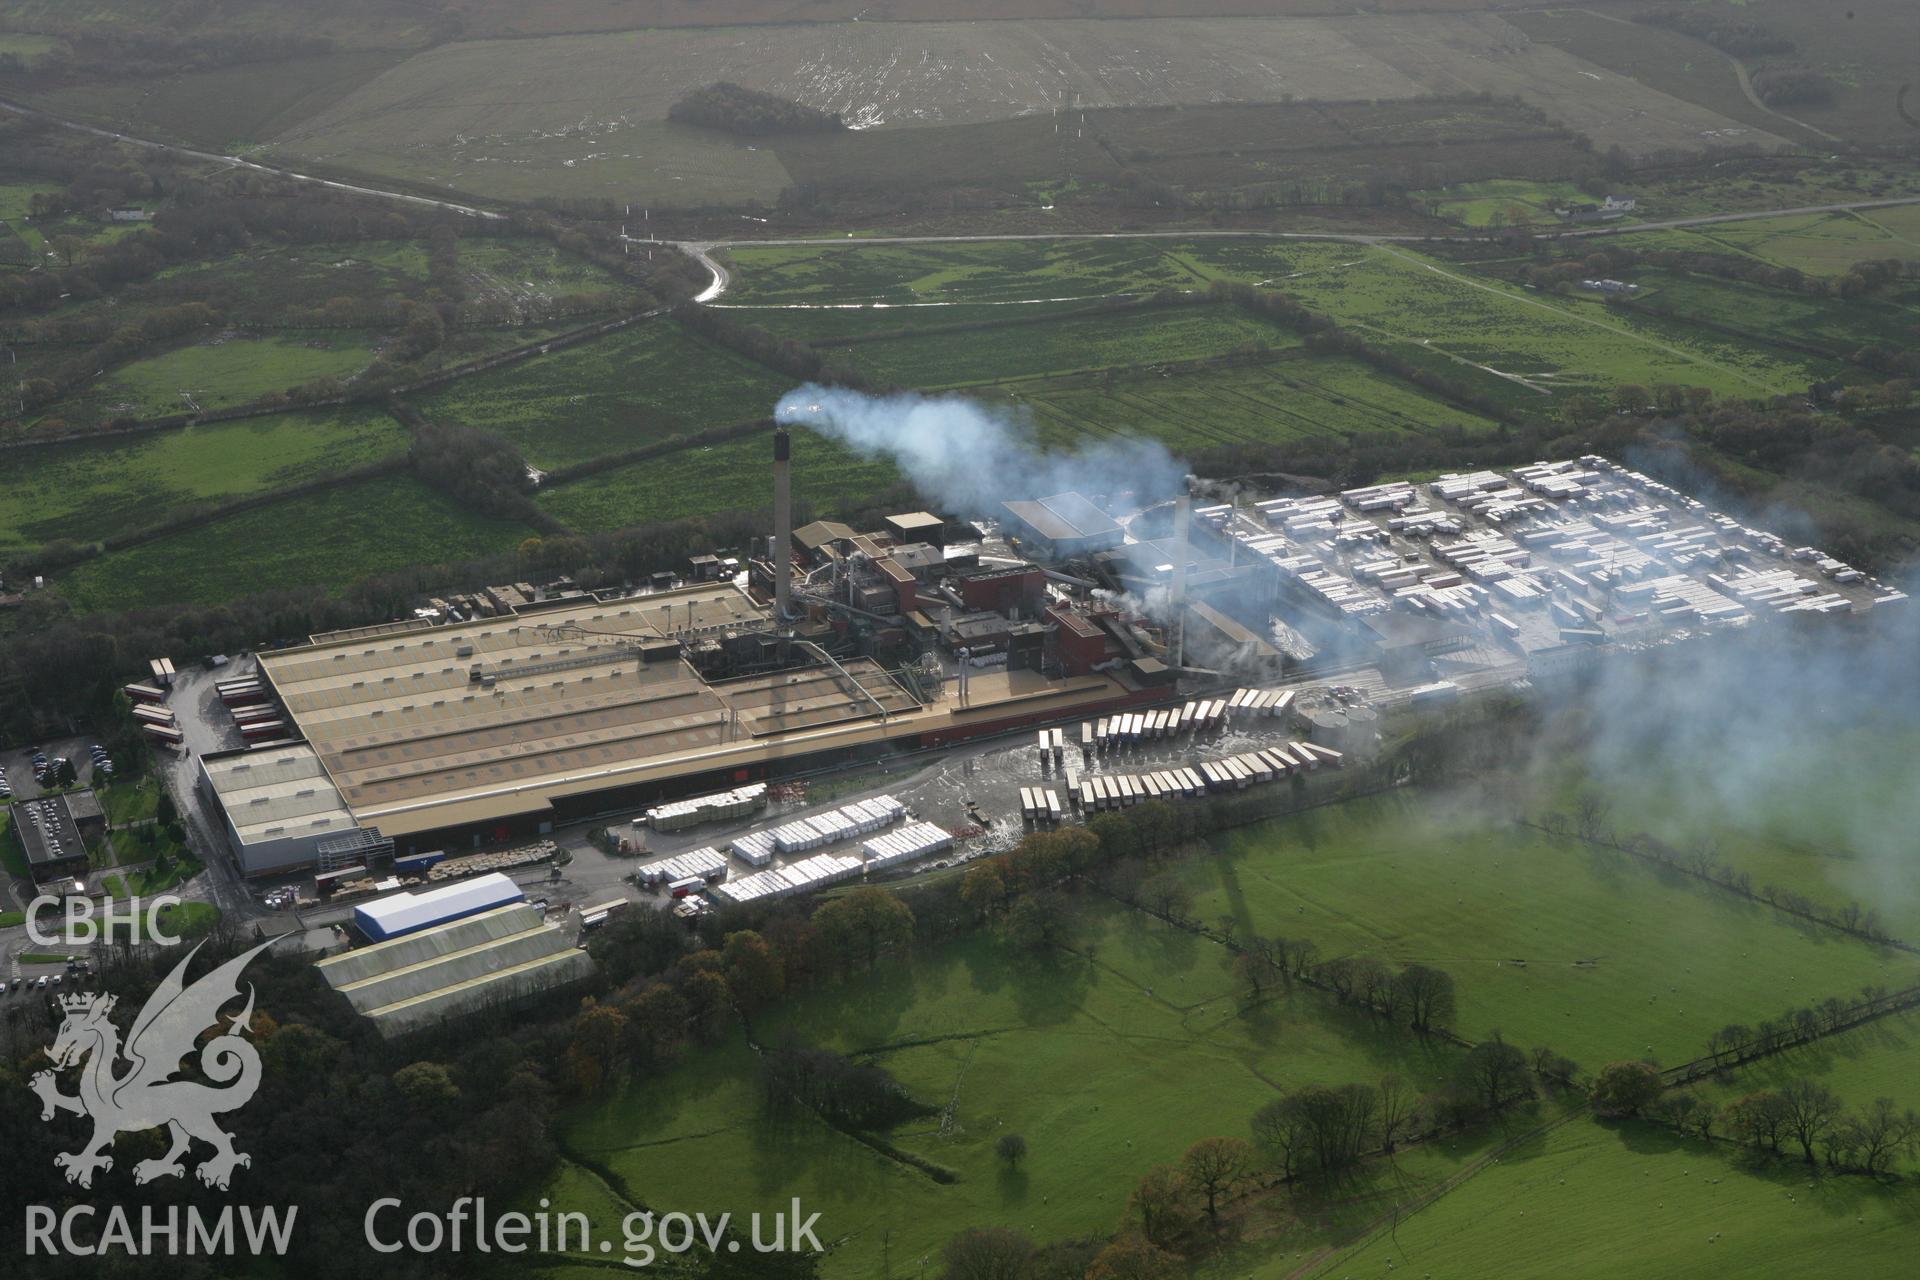 RCAHMW colour oblique photograph of Rockwool Factory, Pencoed. Taken by Toby Driver on 17/11/2011.